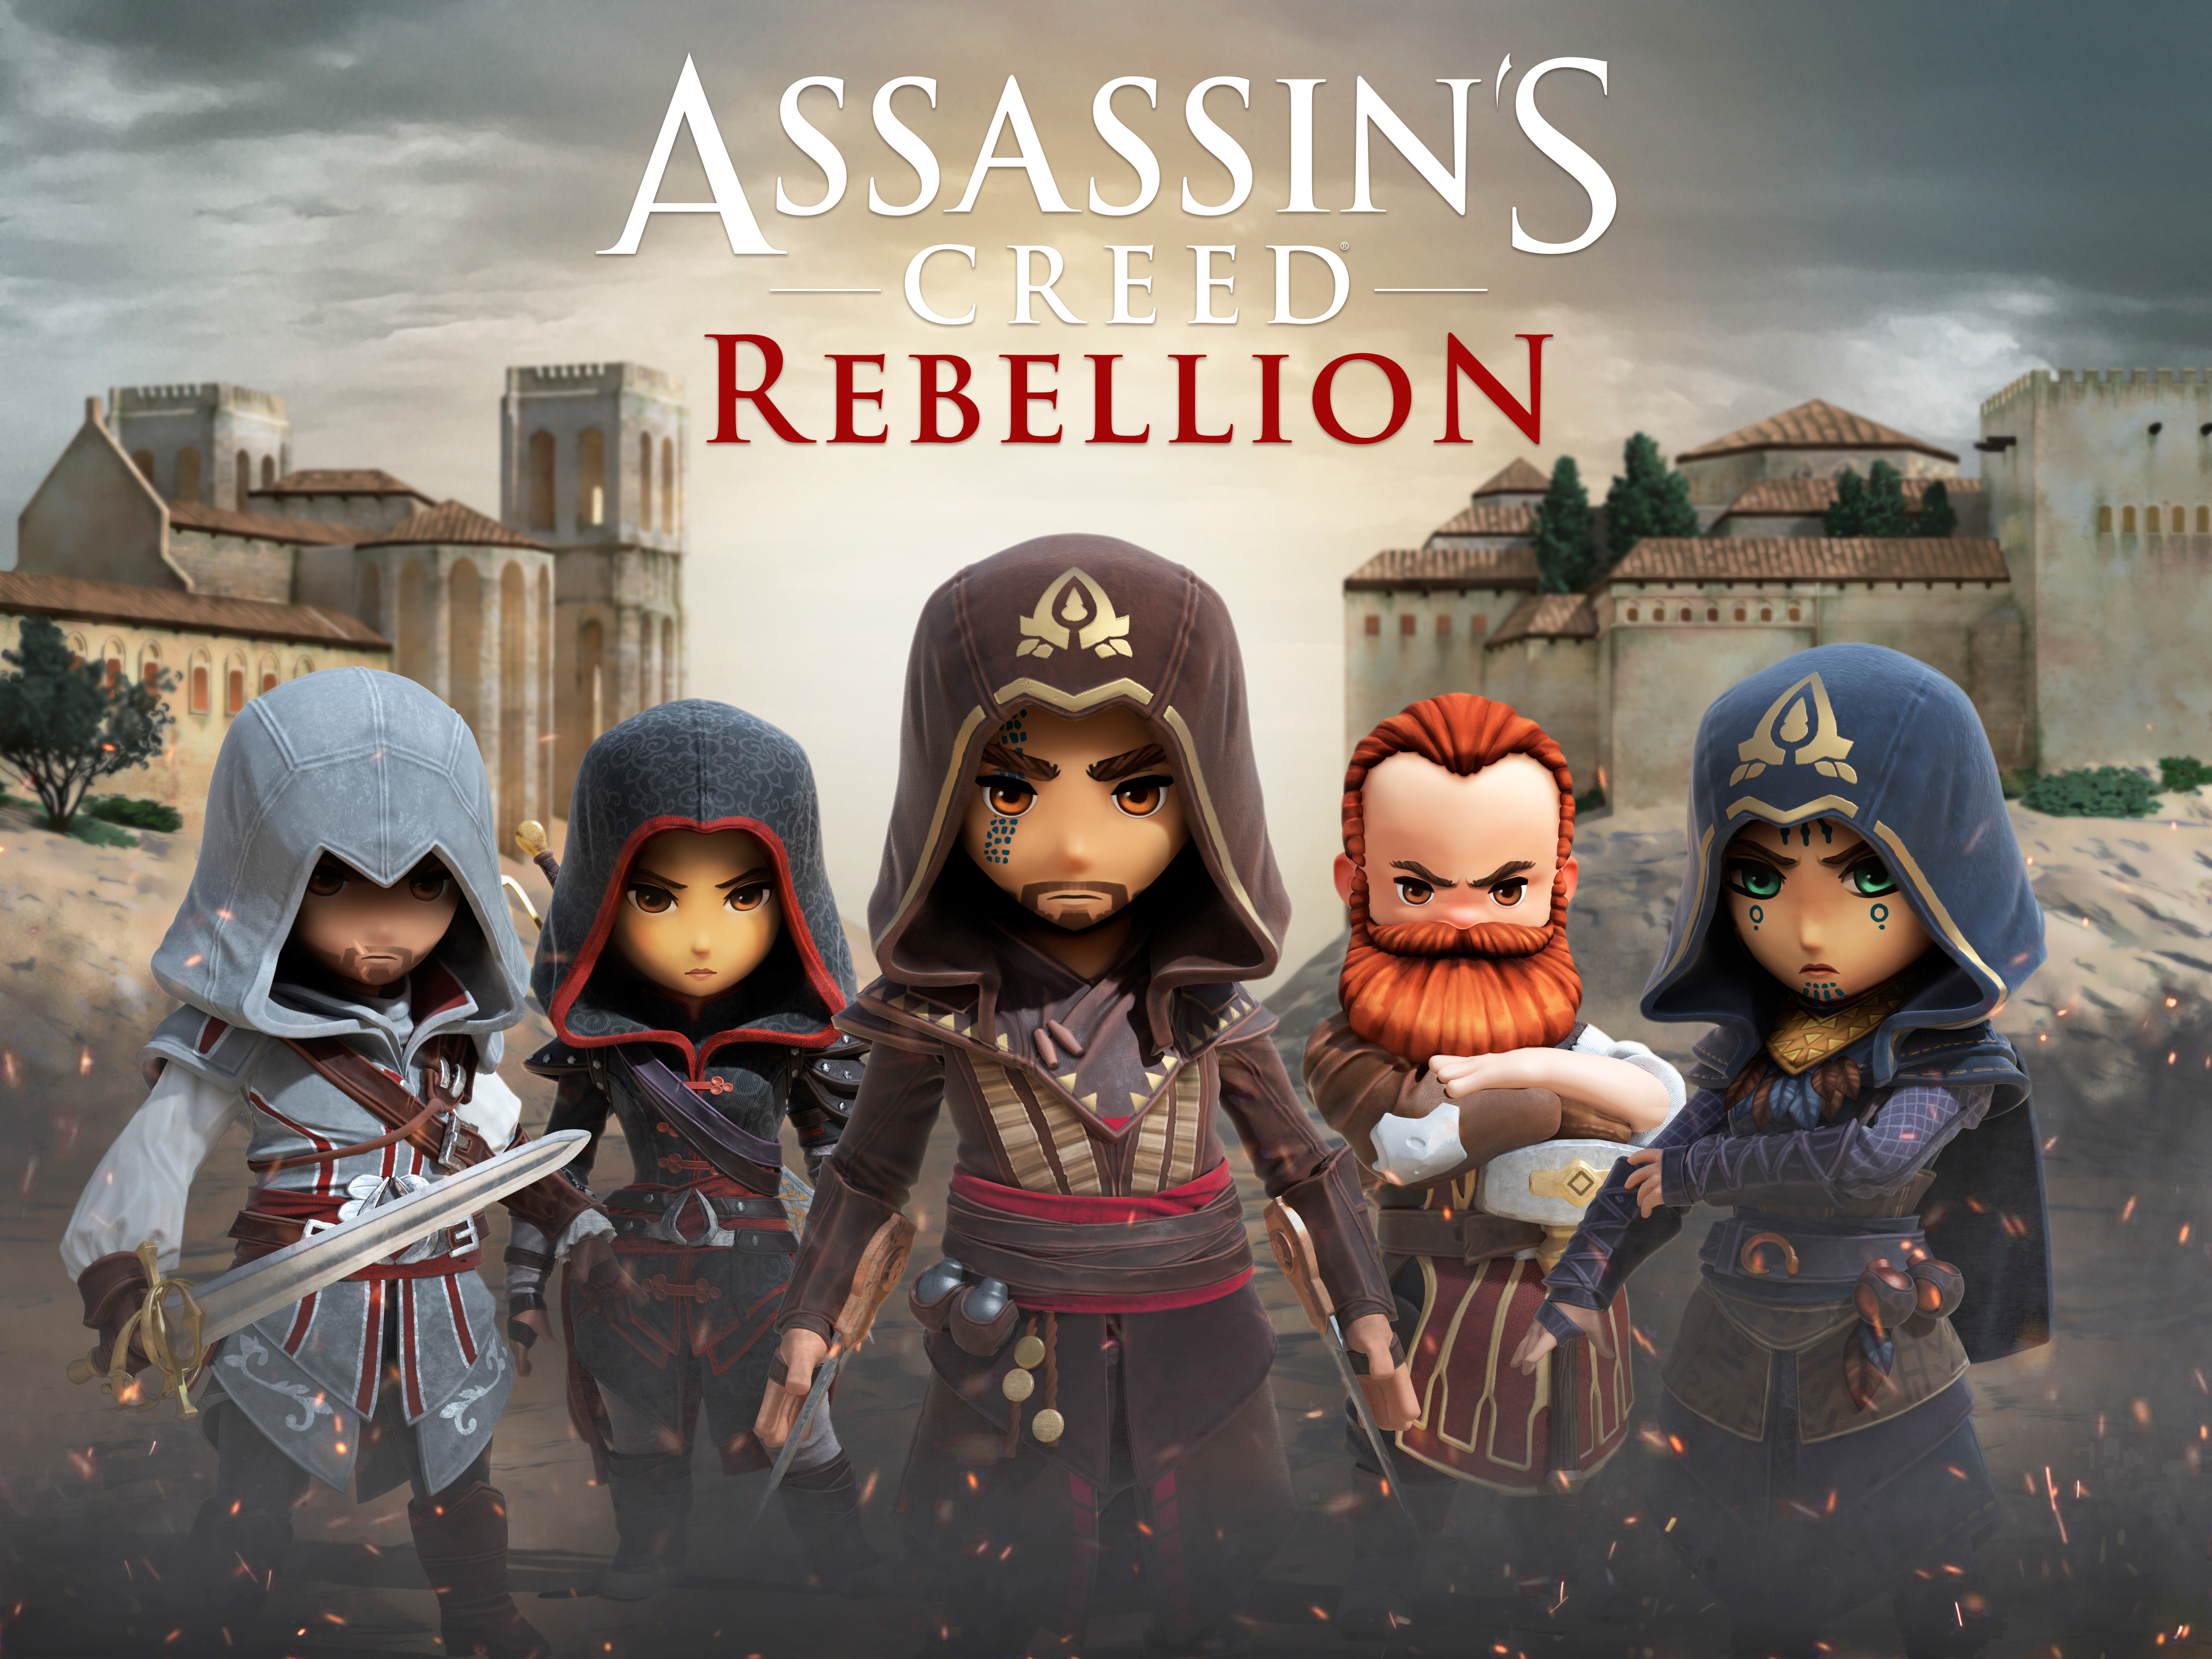 Wallpapers assassin`s creed games assassins creed rebellion on the desktop